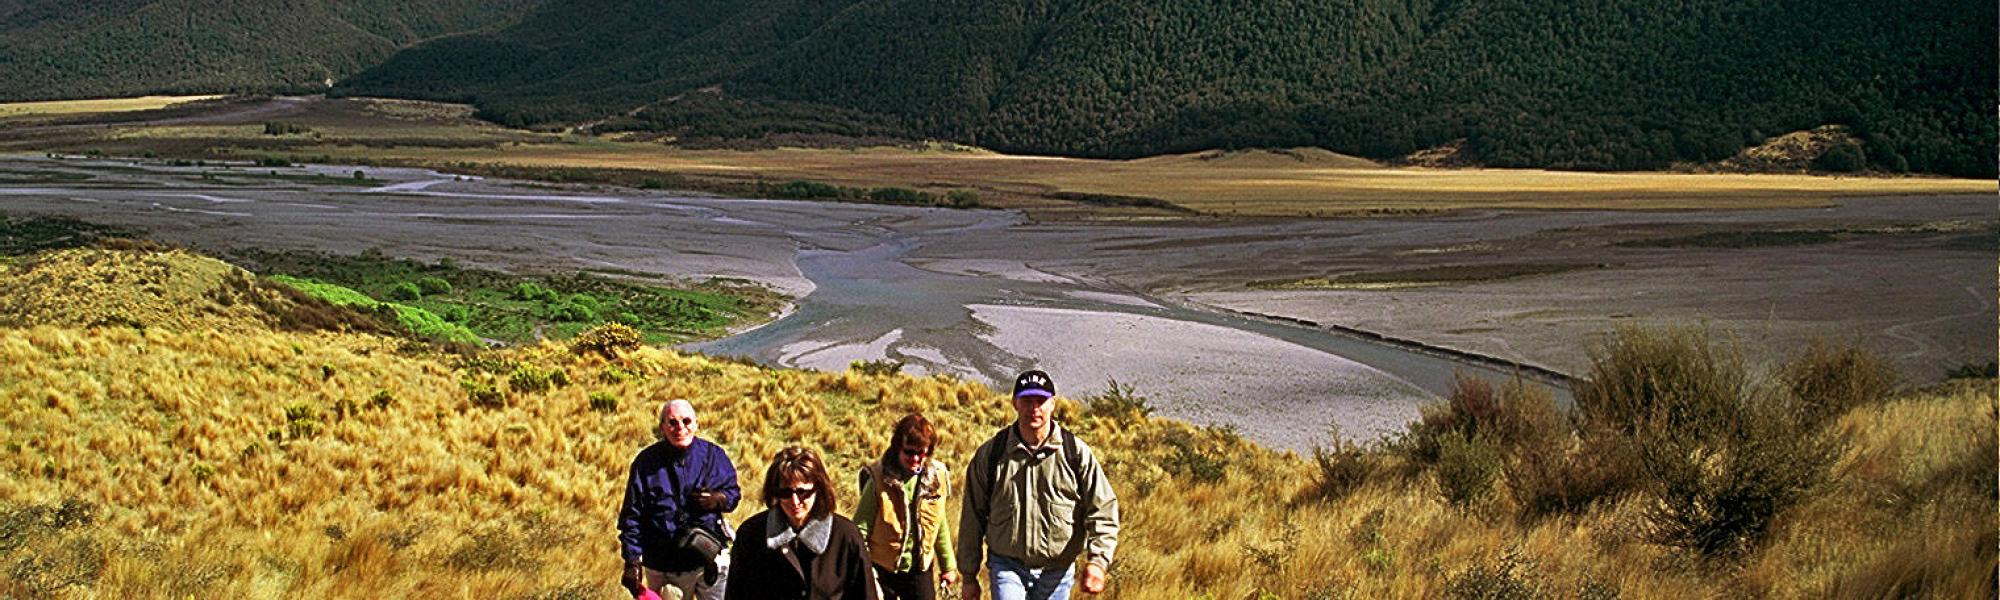 Hike the spectacular 6000 acre Wilderness Lodge sheep farm in New Zealand